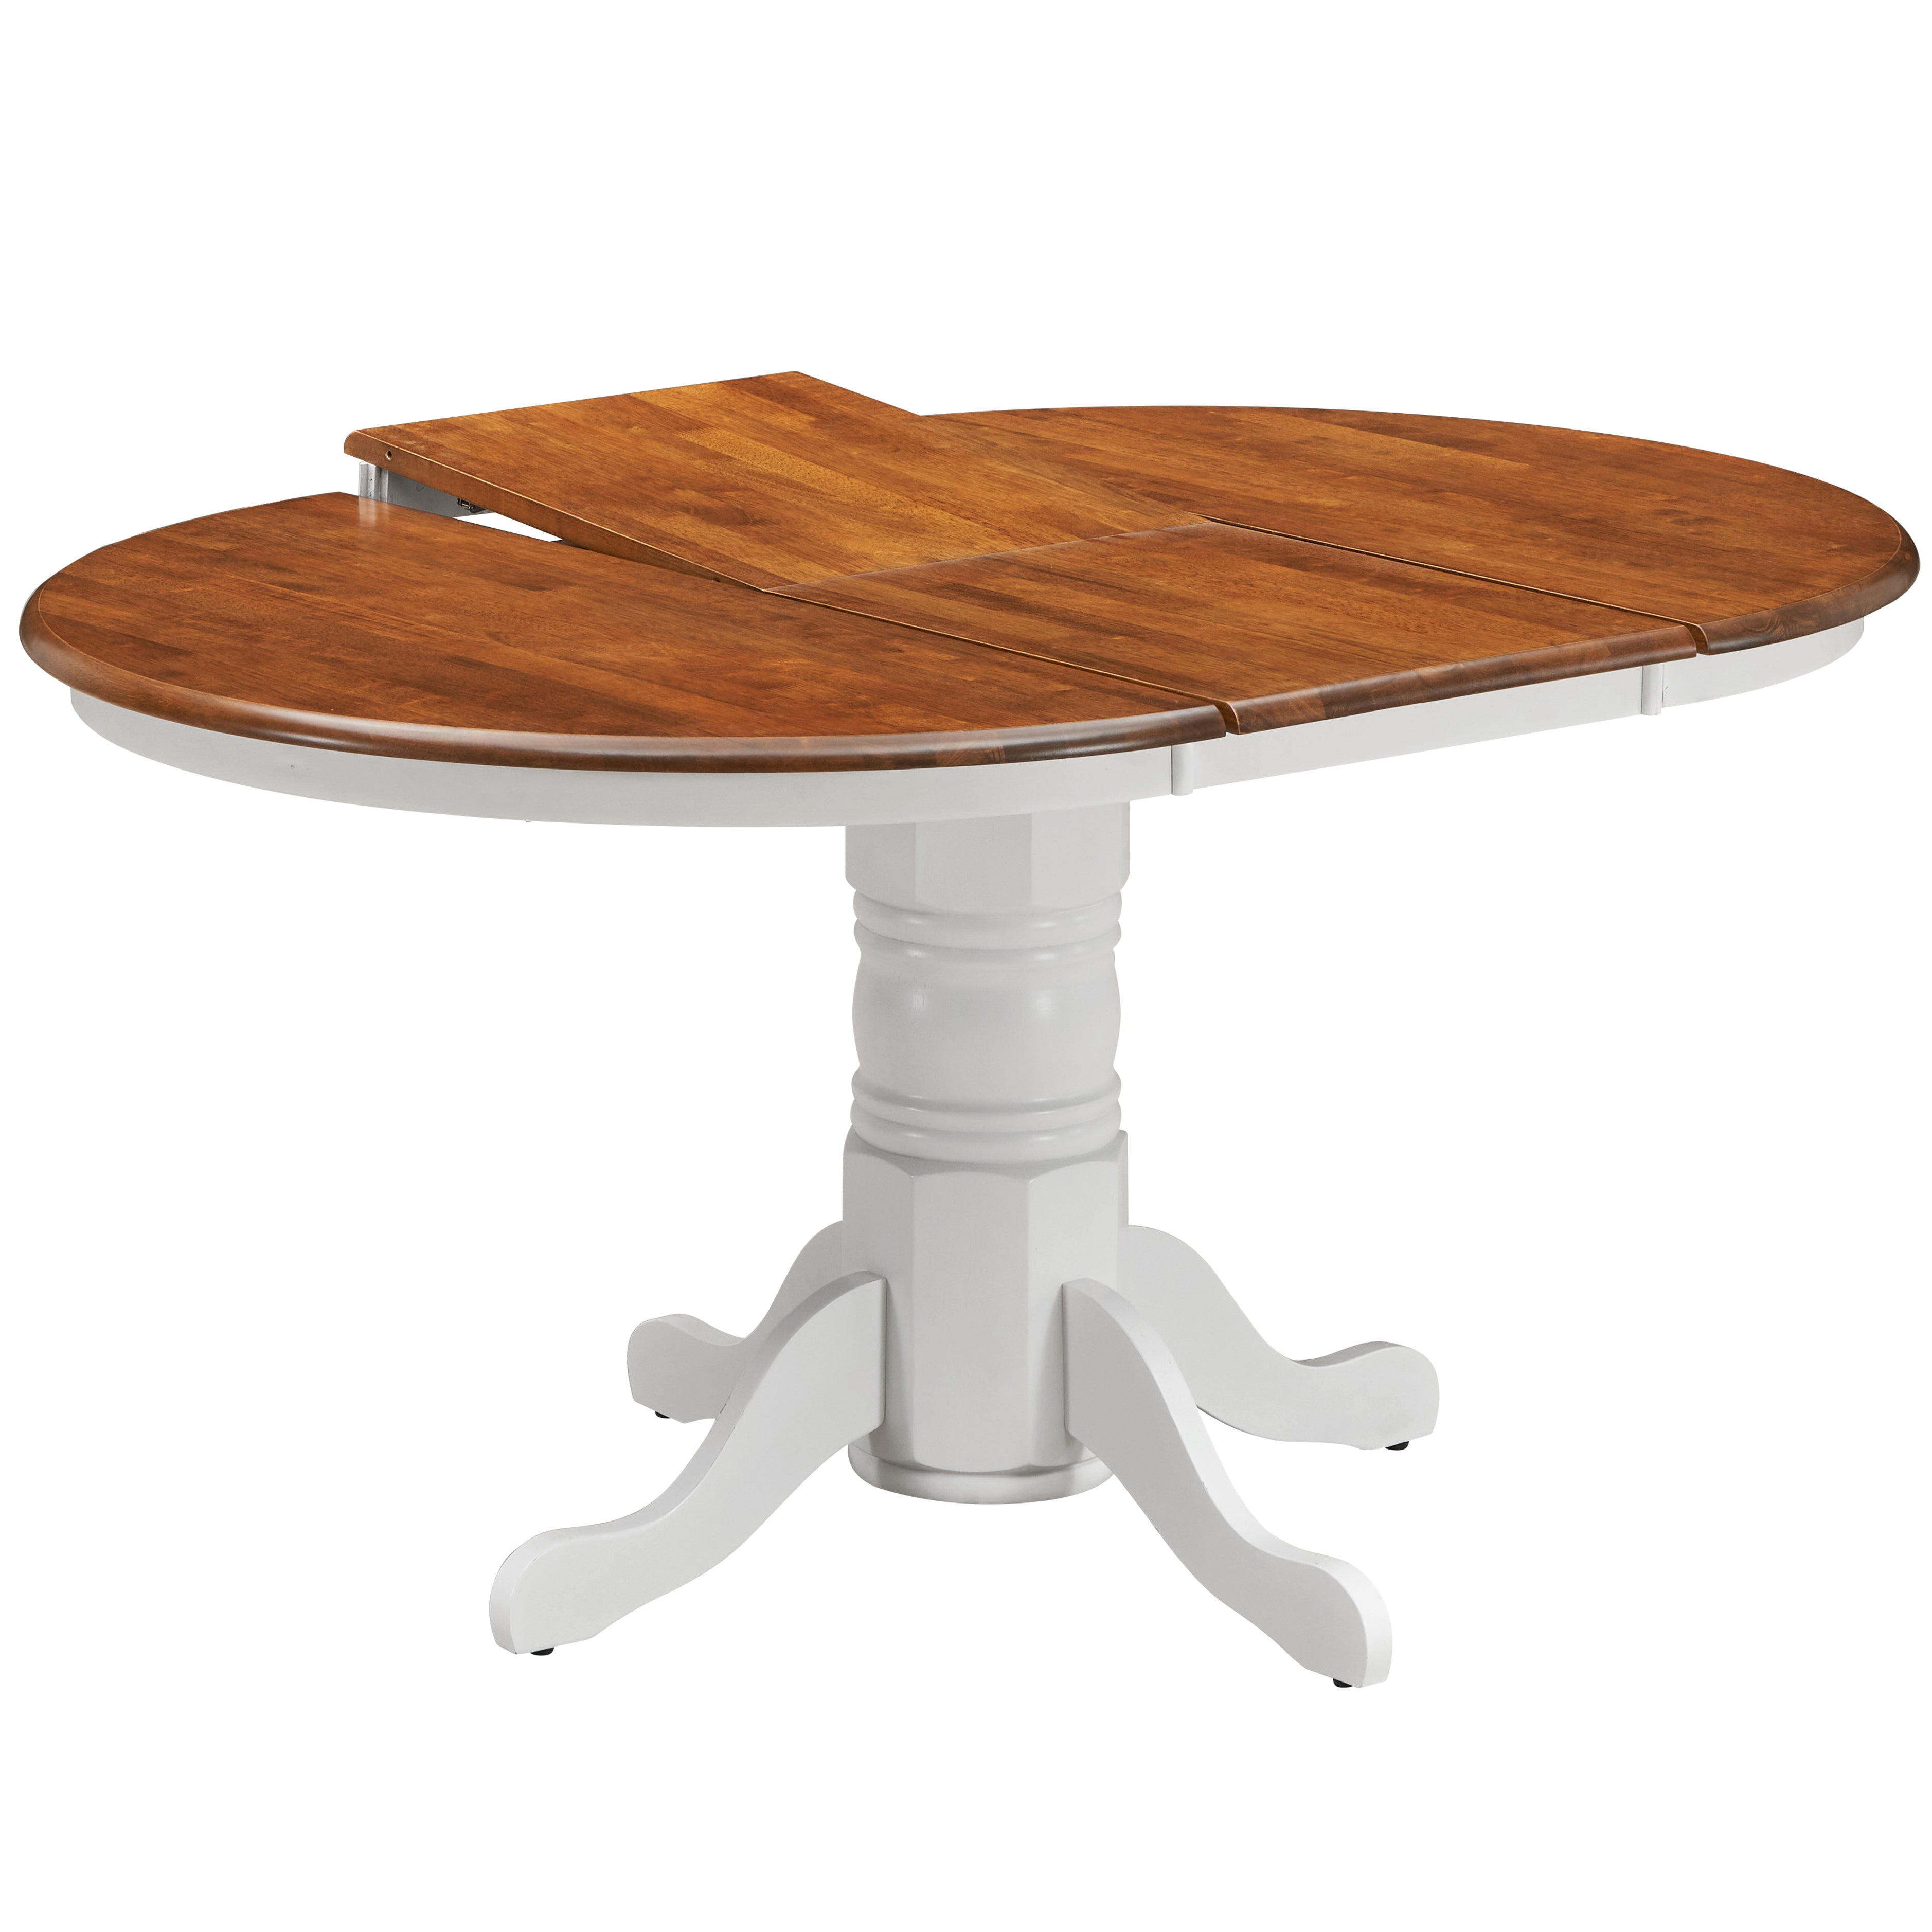 lupin-extendable-dining-table-150cm-pedestral-stand-solid-rubber-wood-white-oak